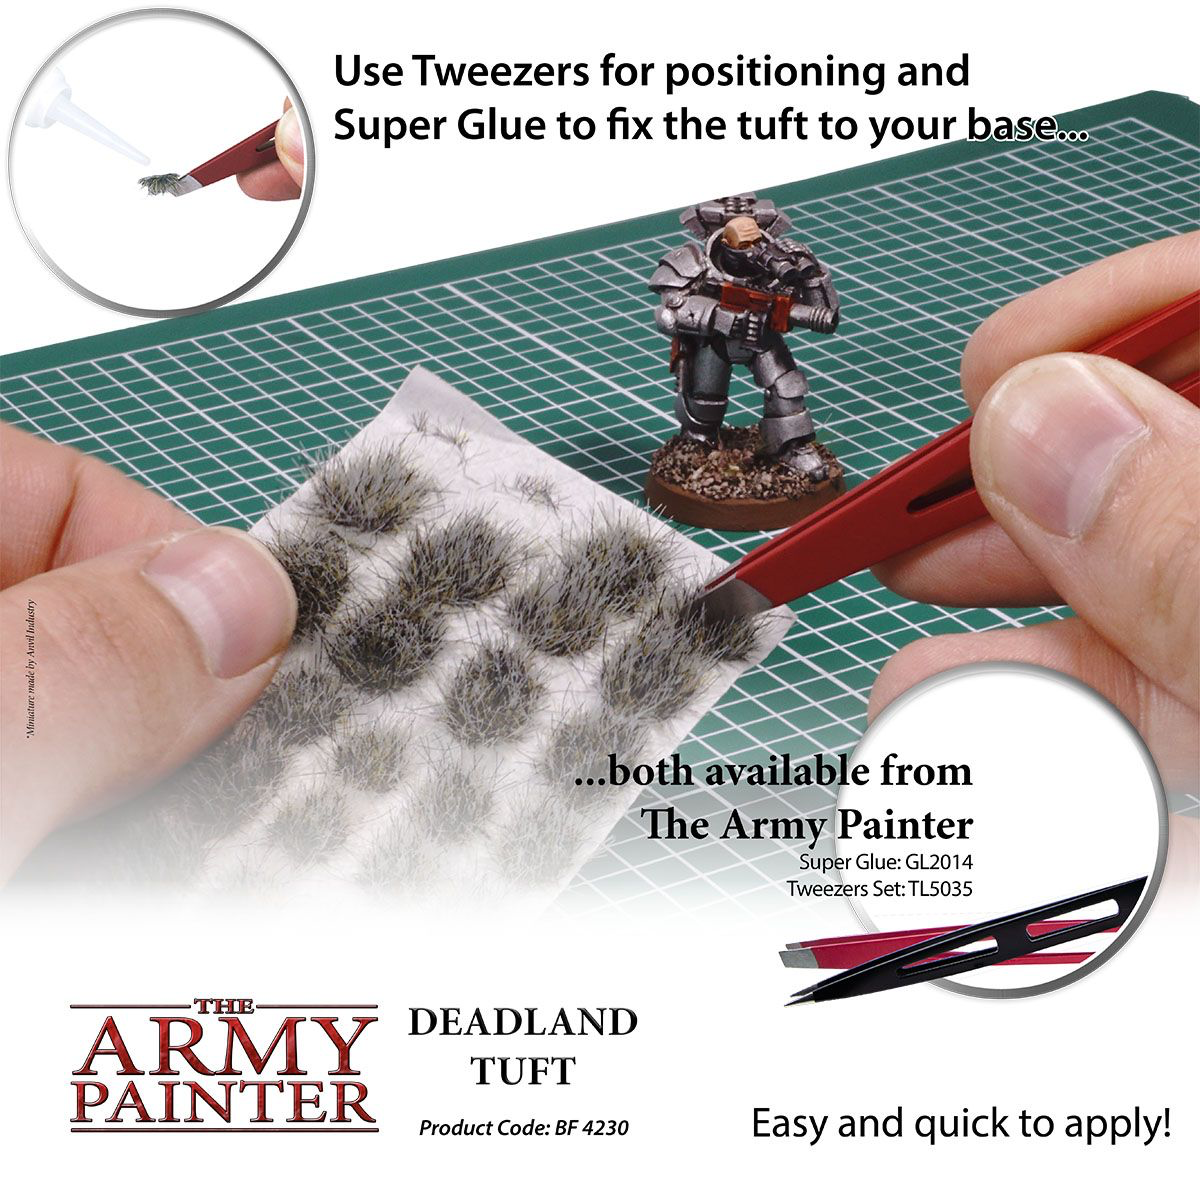 The Army Painter - Deadland Tufts